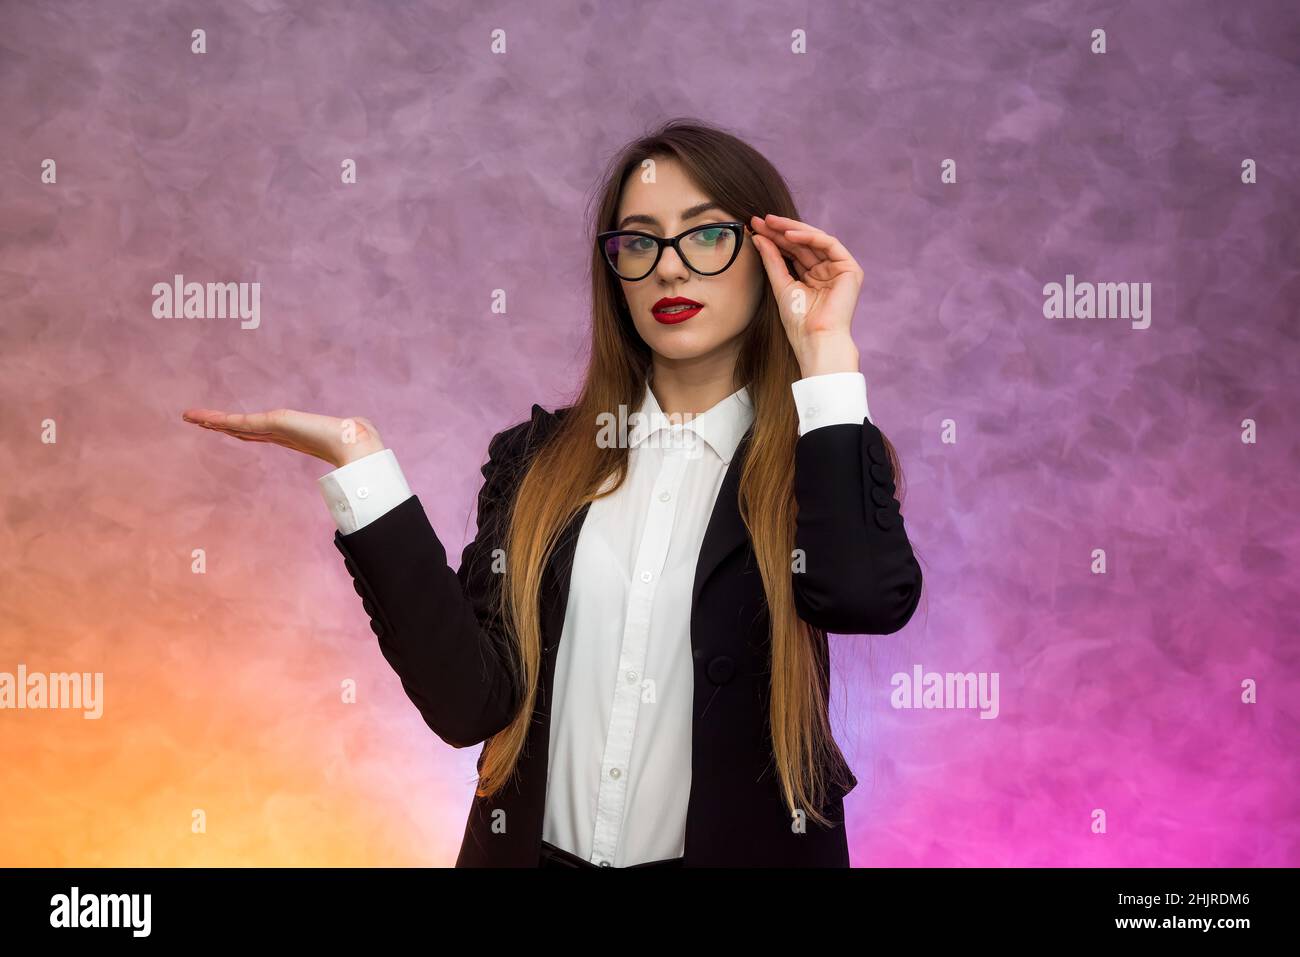 Attractive business woman gesturing ob abstract background in original spectacles Stock Photo